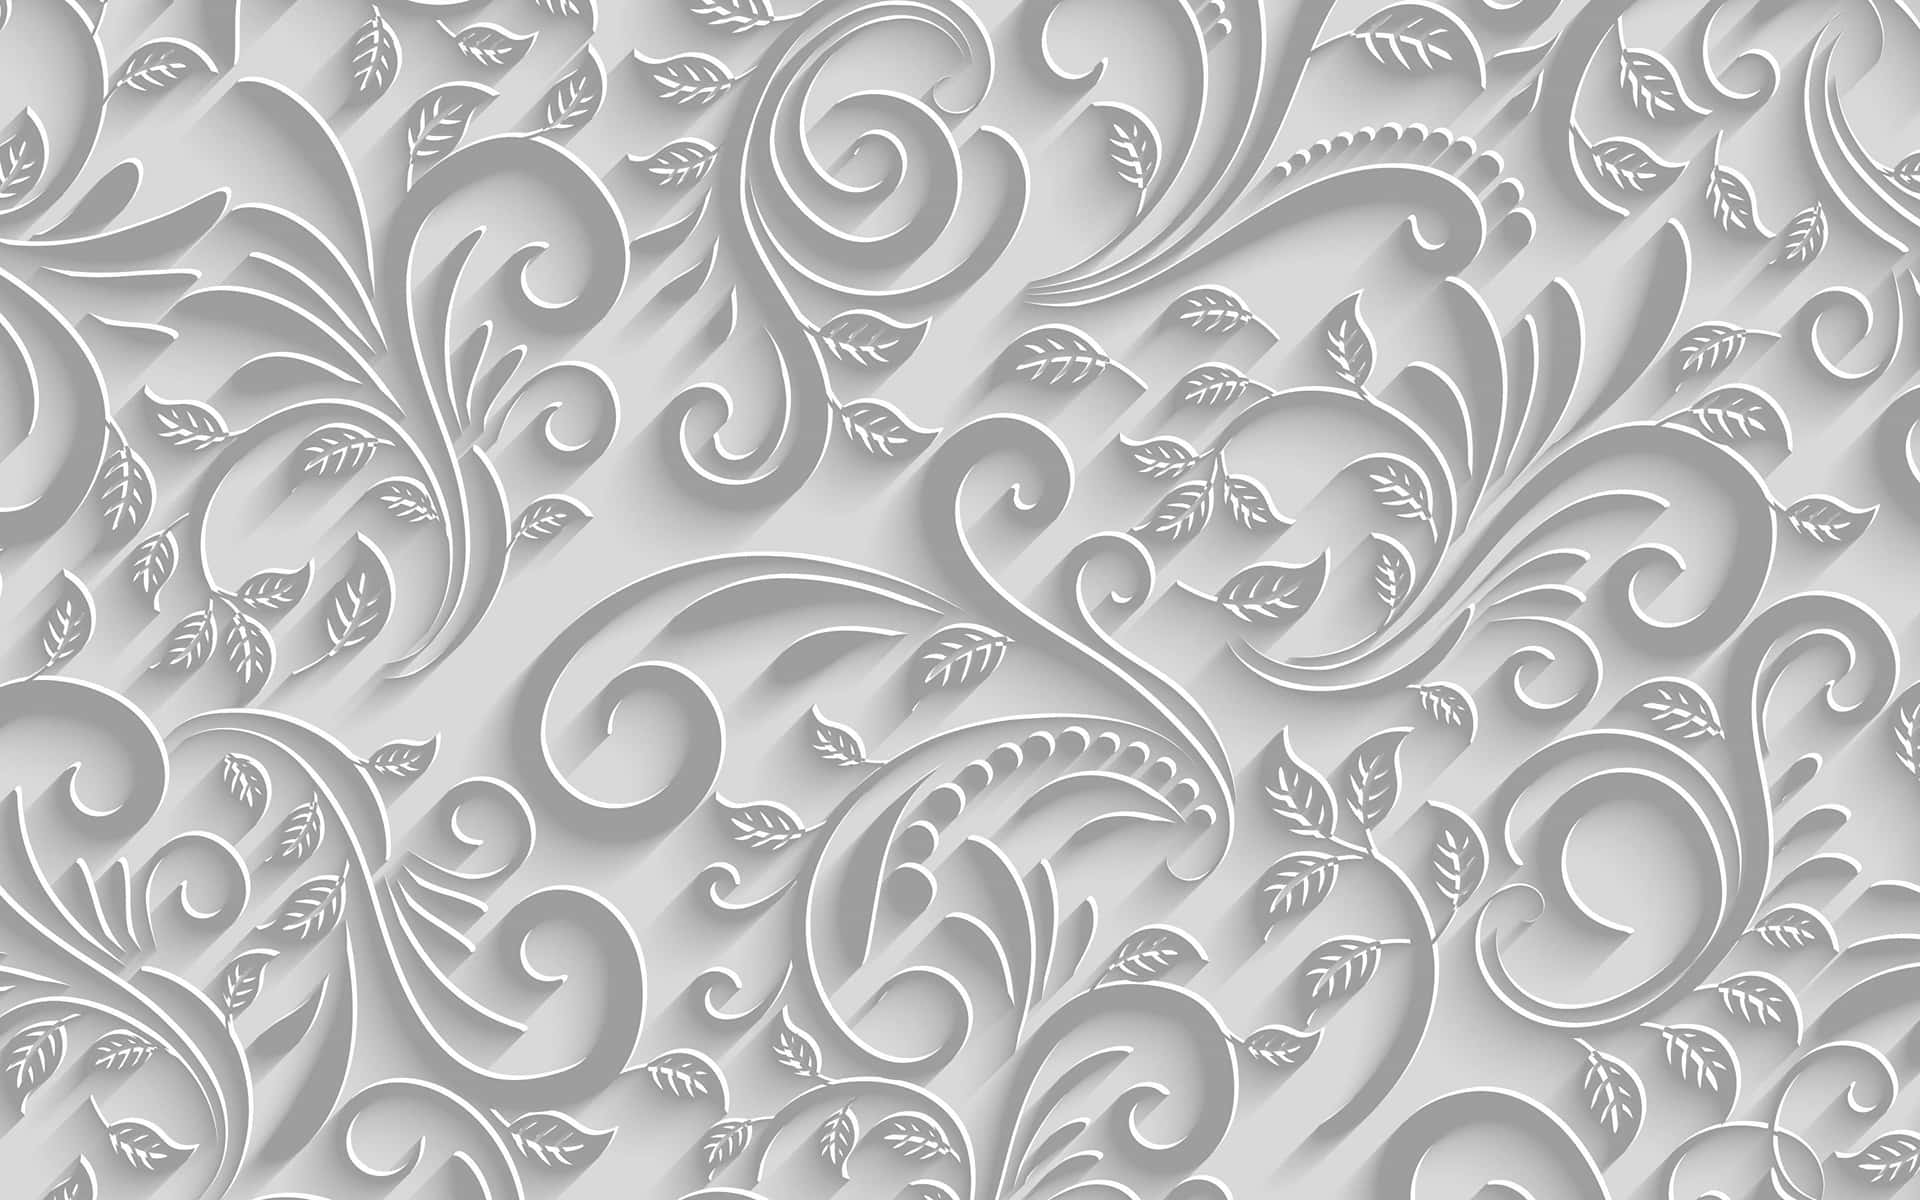 "The vibrant White Hd wallpaper creates a bright and intricate backdrop"